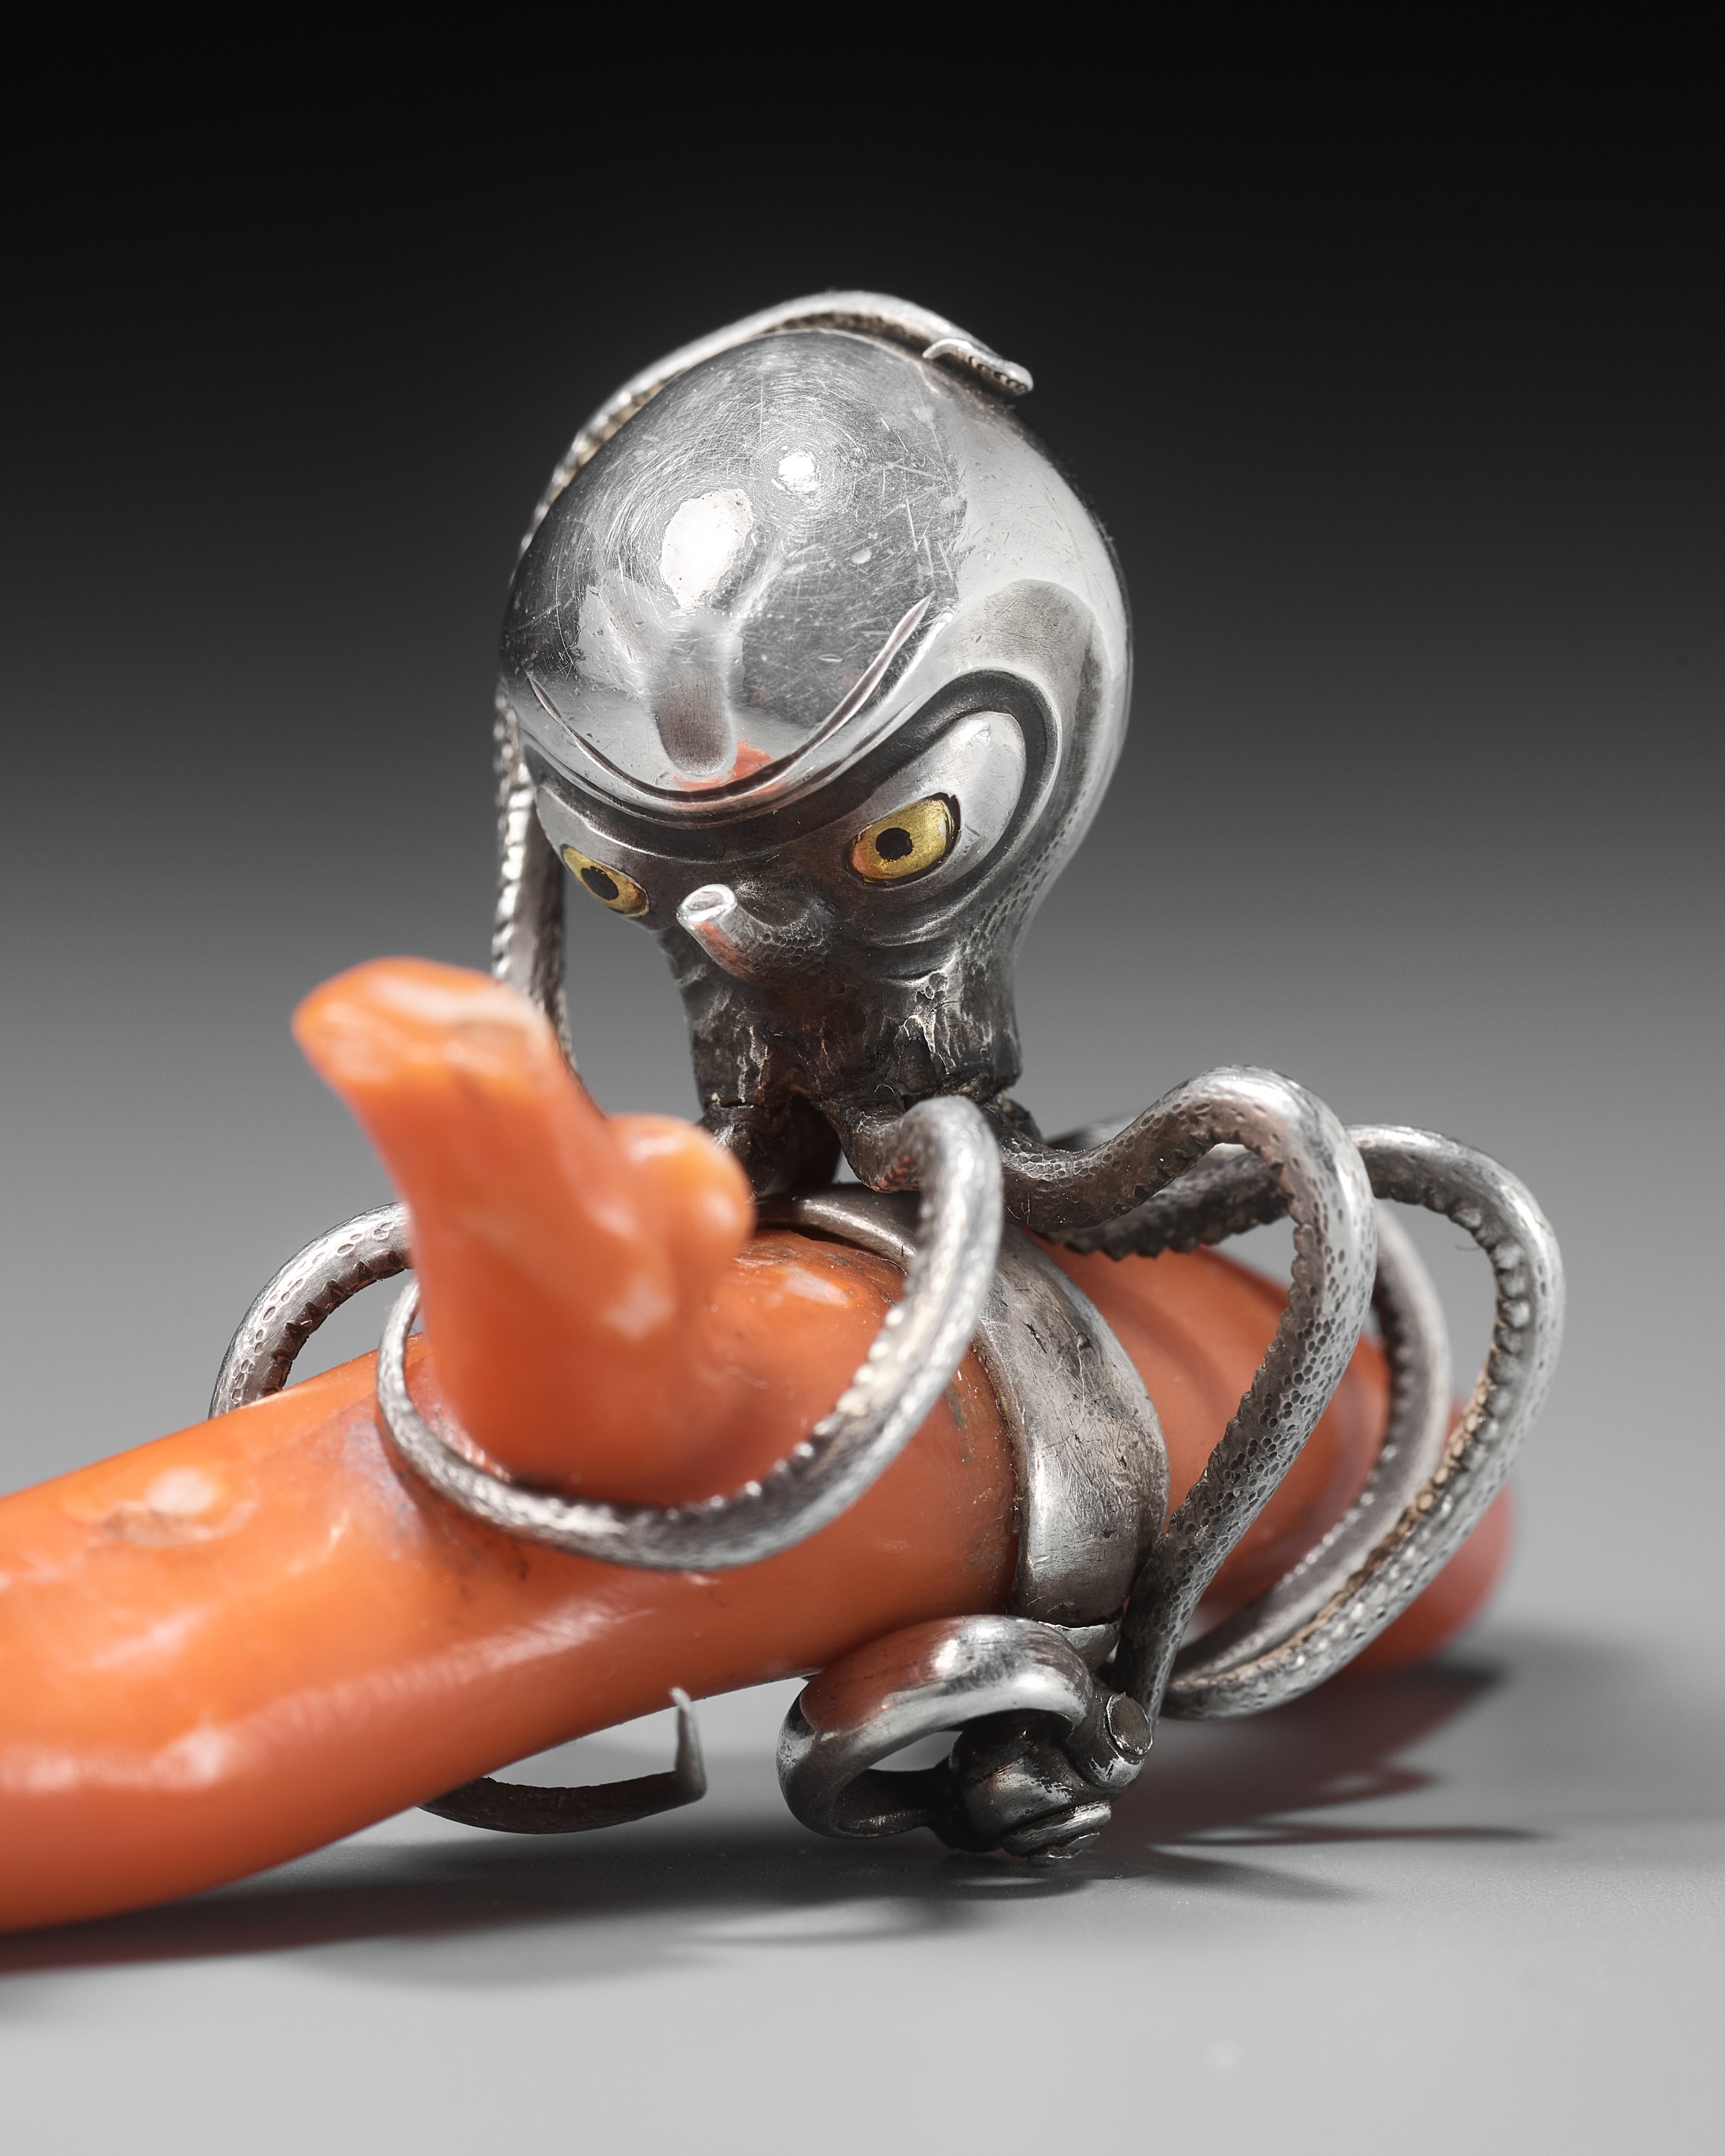 MINKOKU: A LARGE SILVER NETSUKE OF AN OCTOPUS GRASPING A PIECE OF CORAL